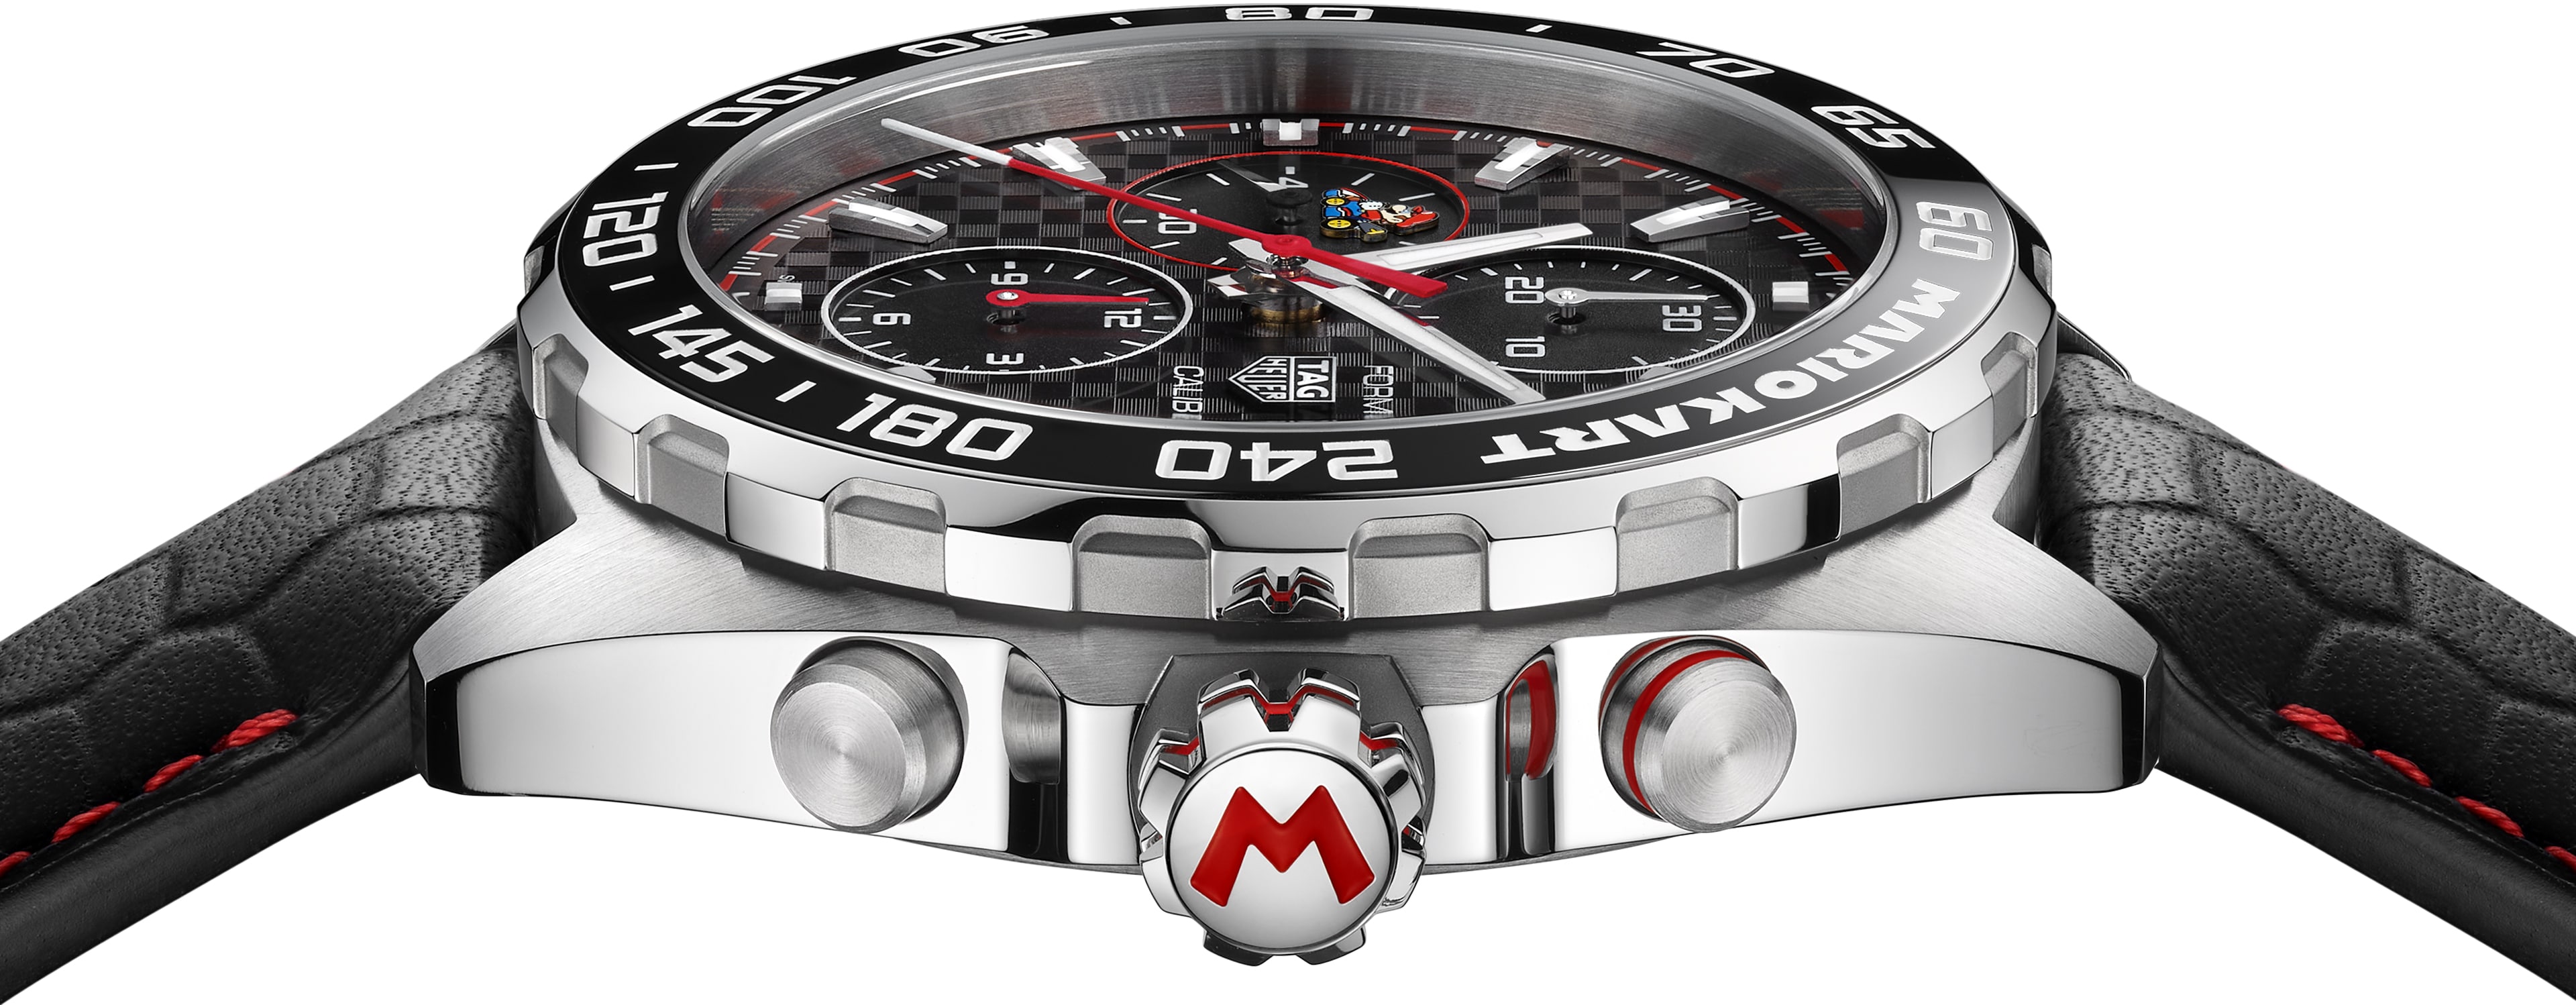 TAG Heuer Formula 1 x Mario Kart Limited Editions - Hands-On, Price